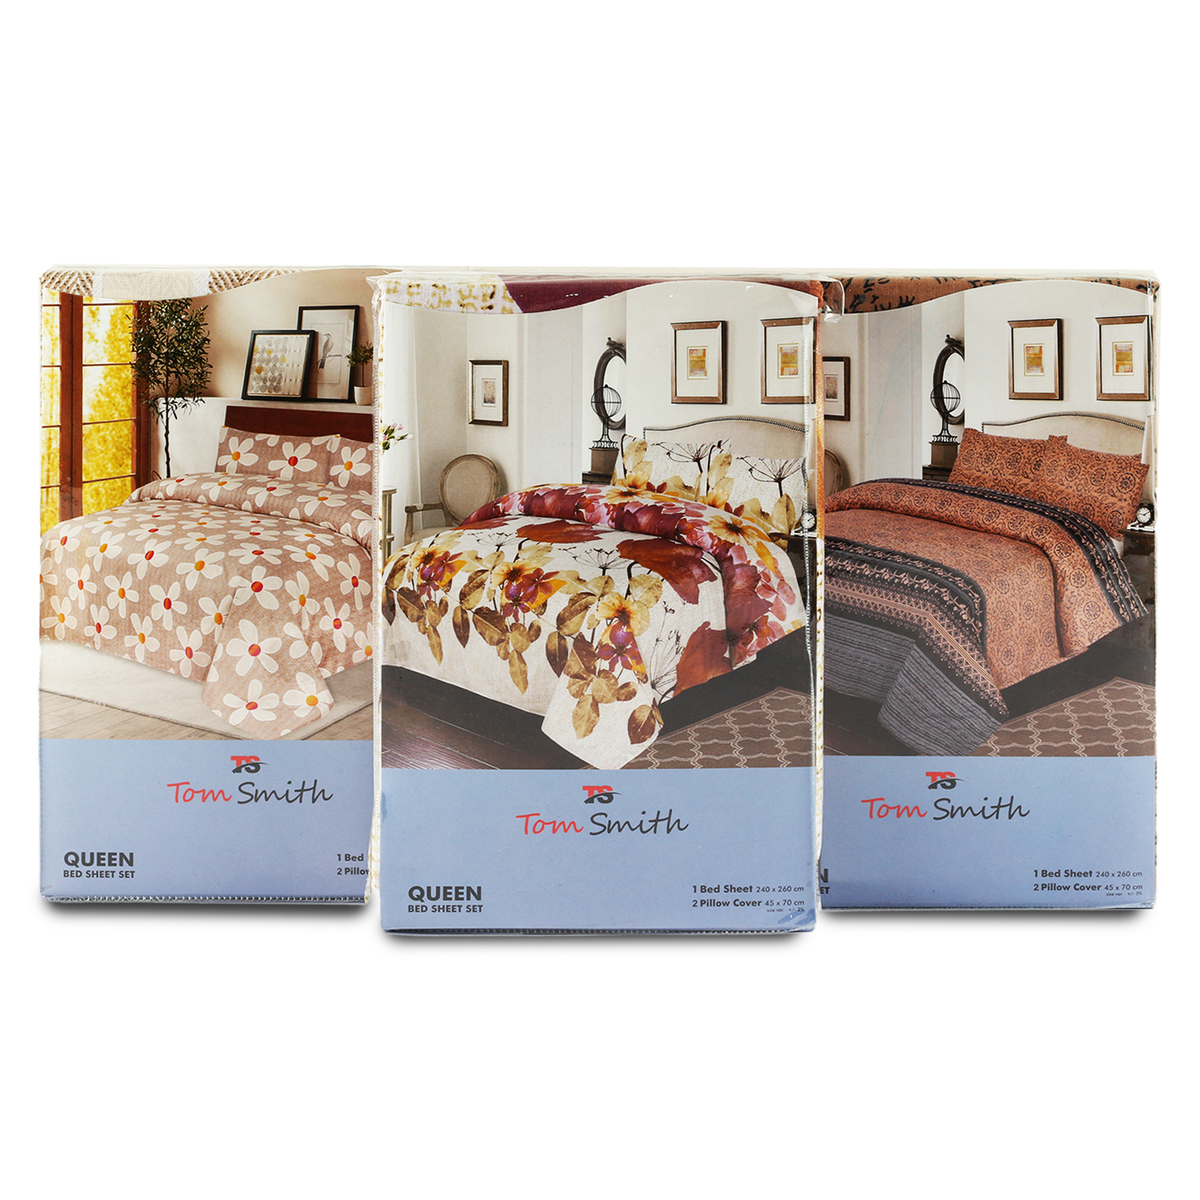 Tom Smith Bed Sheet Set Queen Special 1pc Assorted Colors